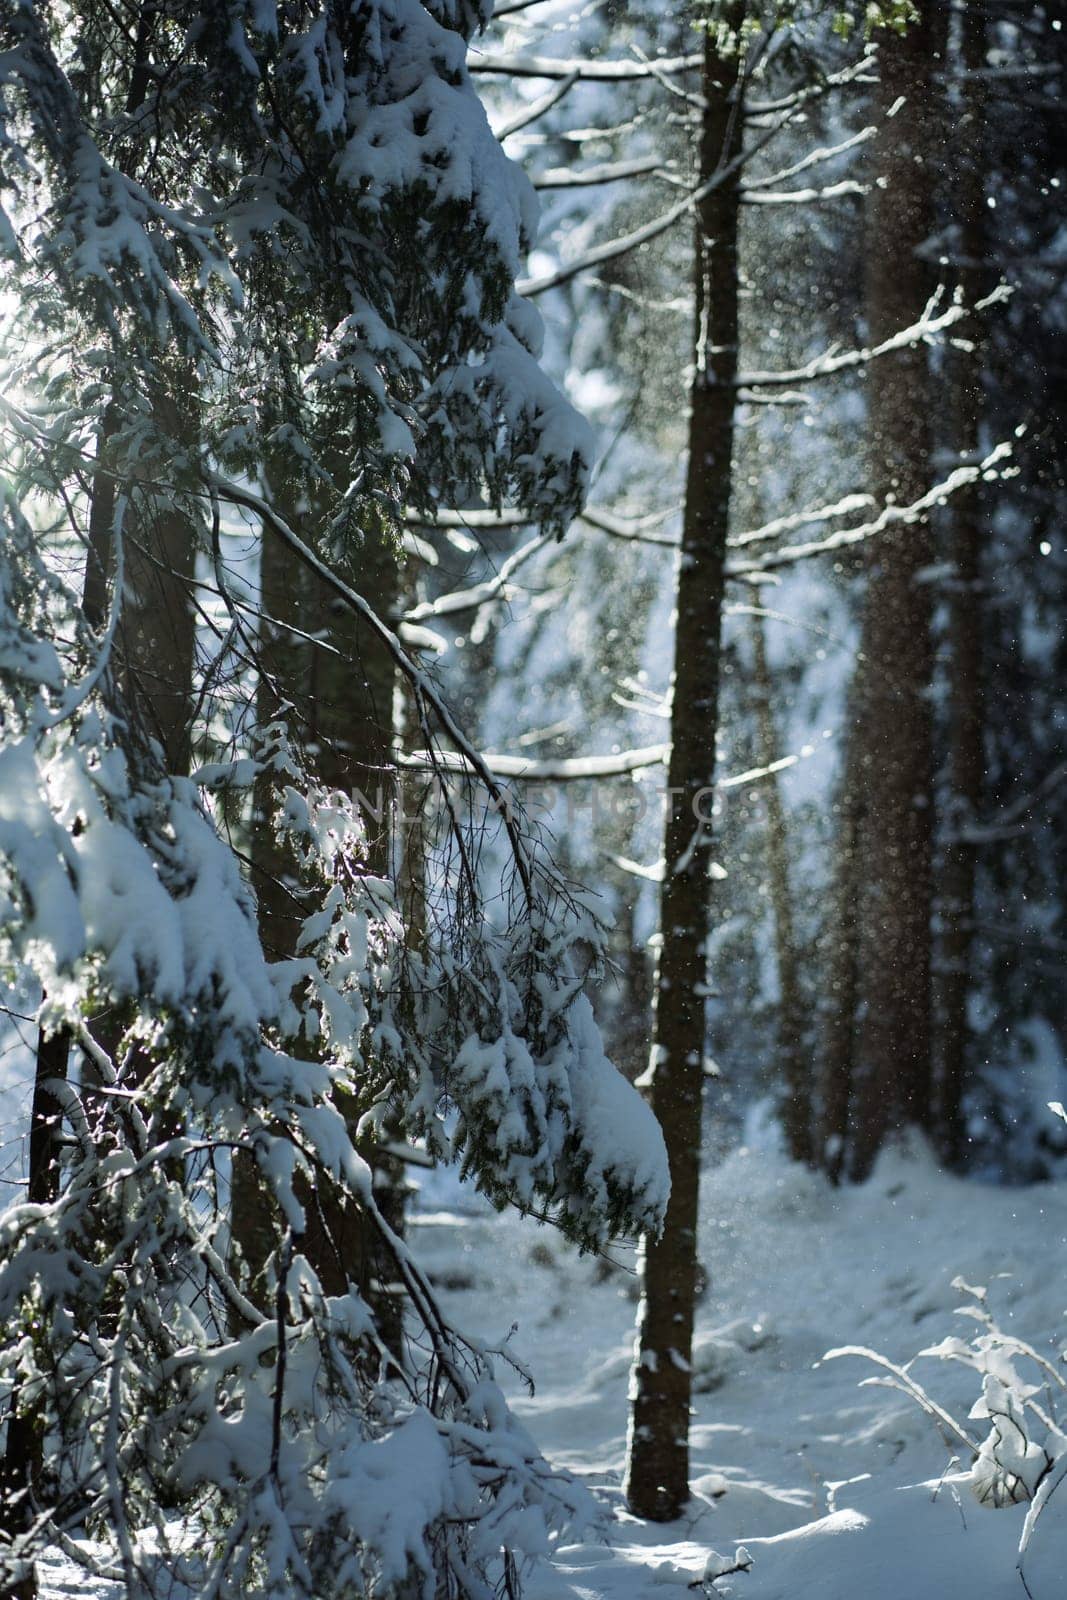 Winter pine forest with snow and ice on tree trunks and branches by Popov